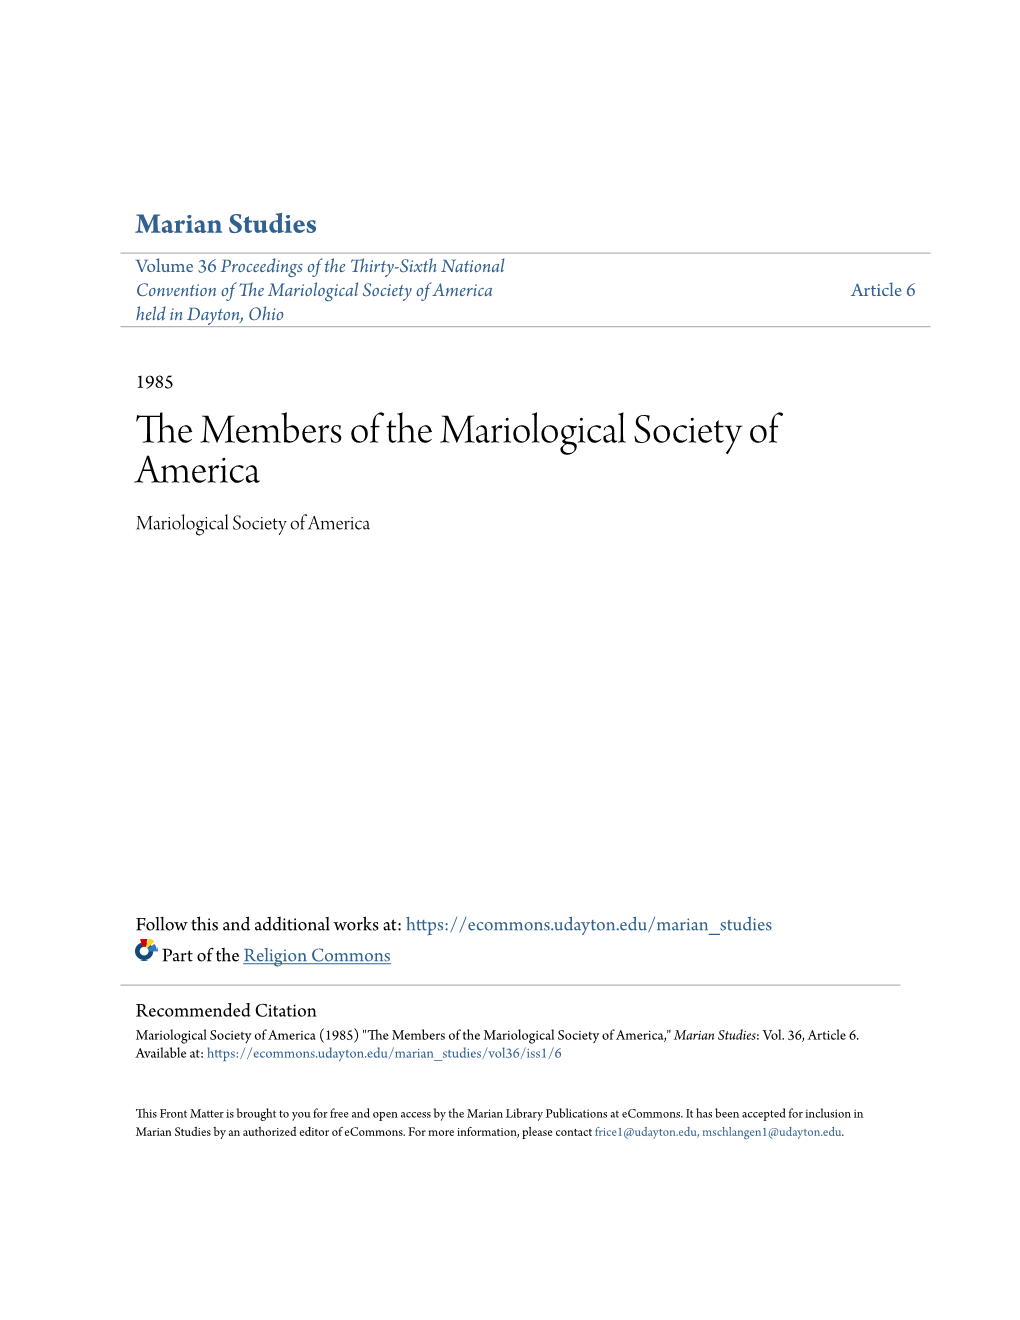 The Members of the Mariological Society of America